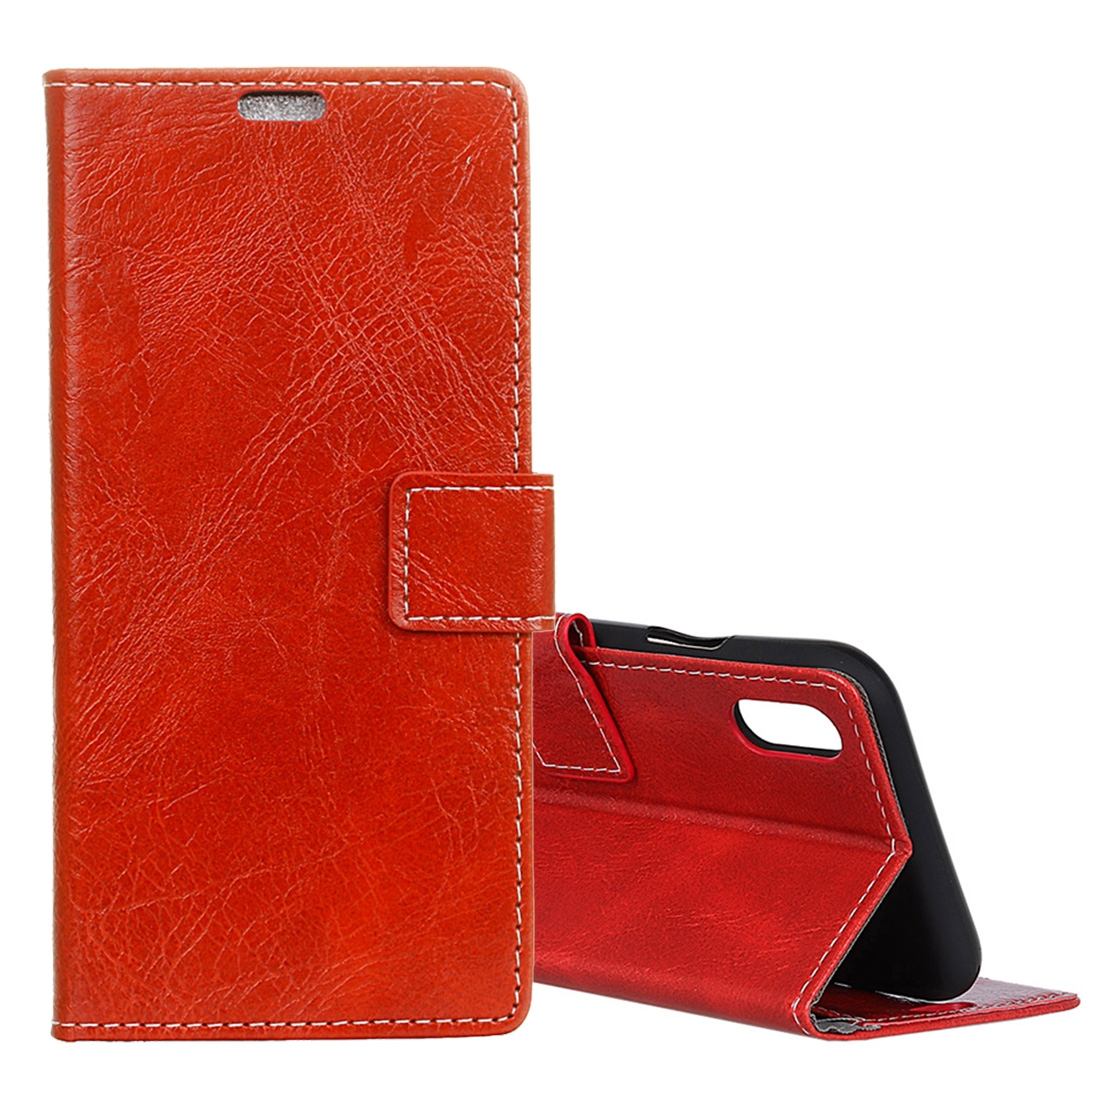 For iPhone XS MAX Case,Retro Wild Horse Texture Leather Wallet Phone Cover,Red